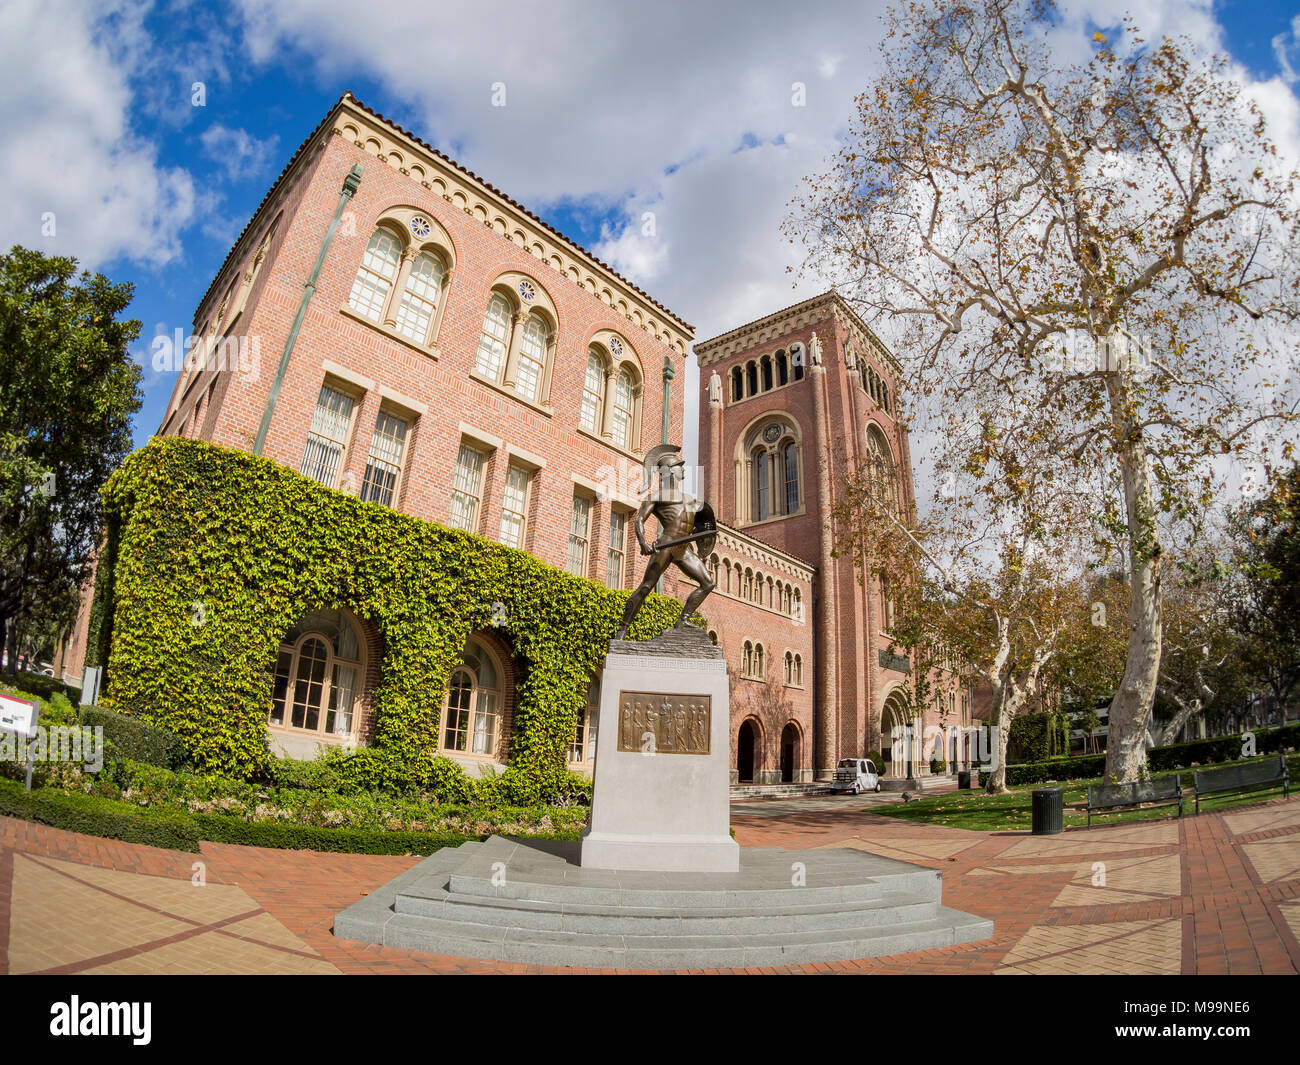 Los Angeles, MAR 16: Exterior view of the beautiful Tommy Trojan and Bovard Aministration buiding in USC on MAR 16, 2018 at Los Angeles, California Stock Photo